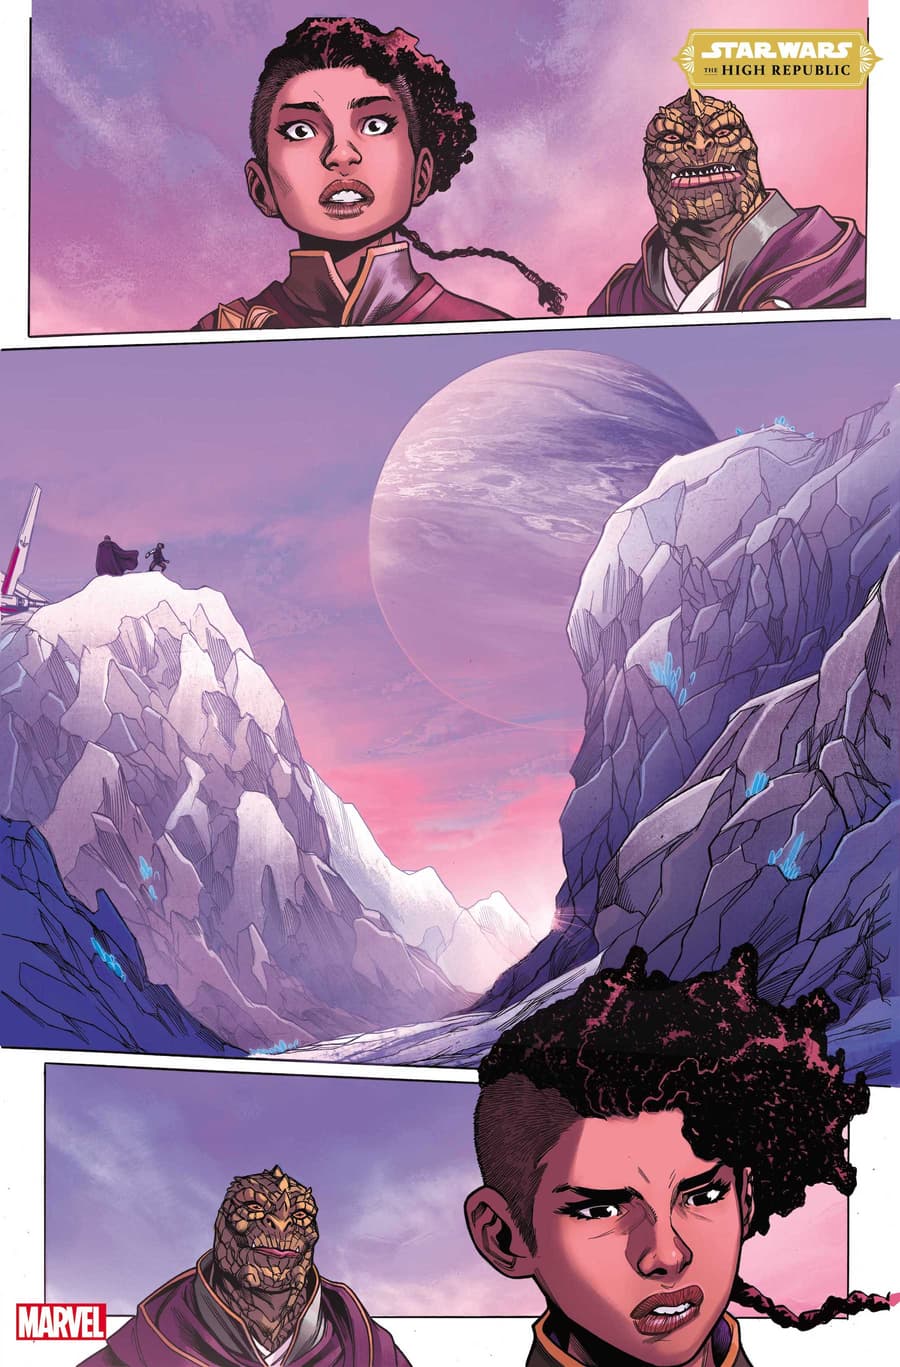 STAR WARS: THE HIGH REPUBLIC #4 preview art by Ario Anindito with inks by Mark Morales and colors by Annalisa Leoni